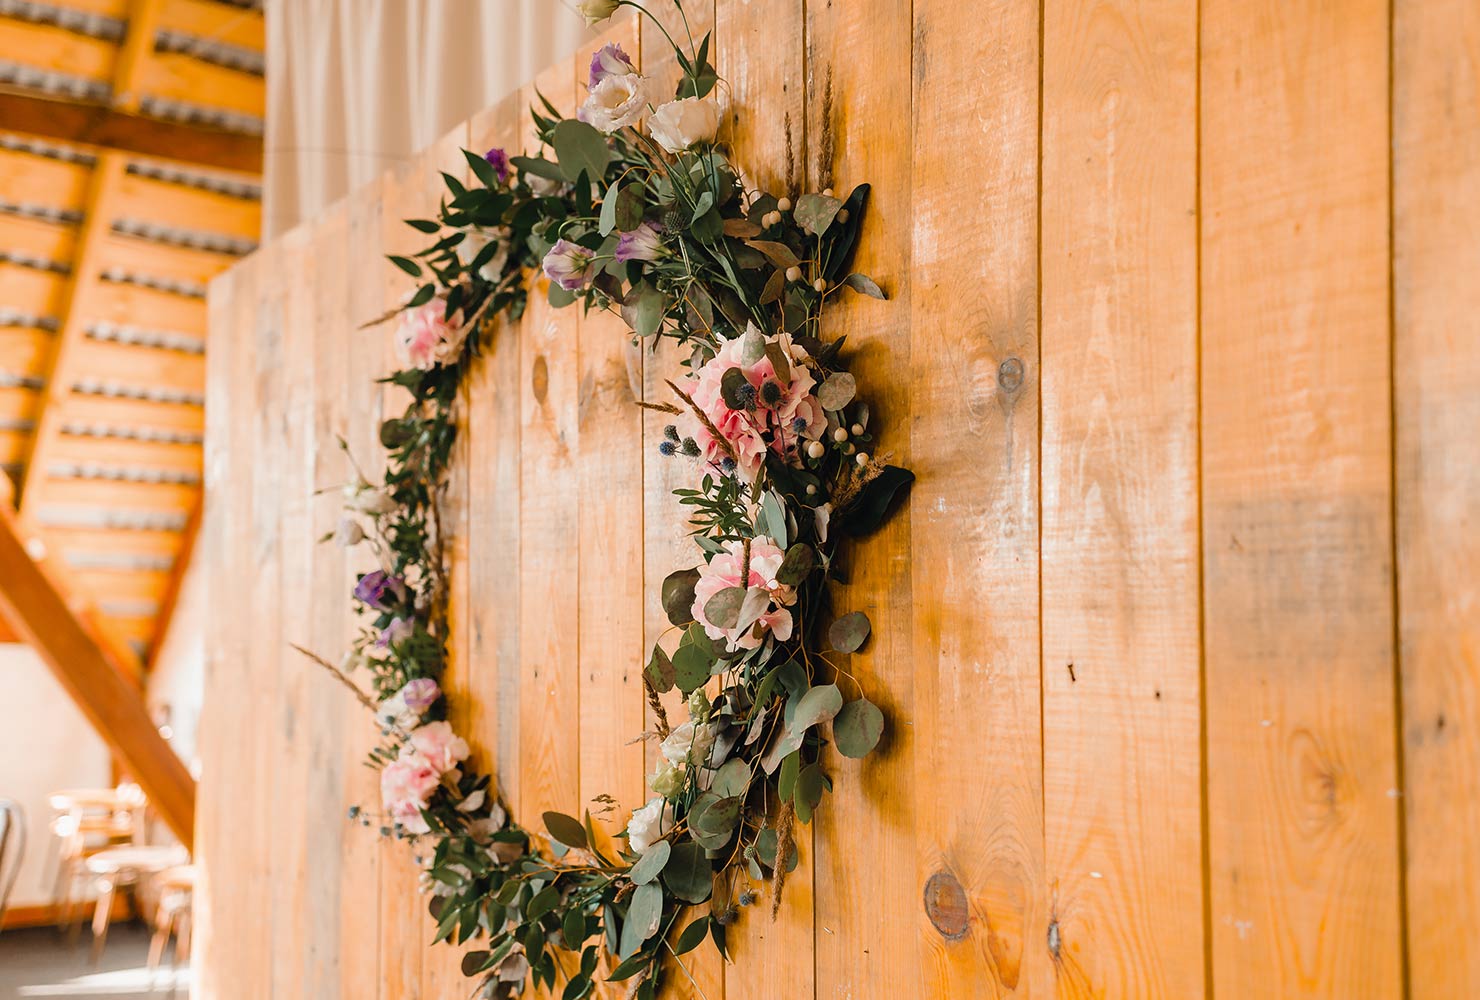 Floral wreath on wood wall.